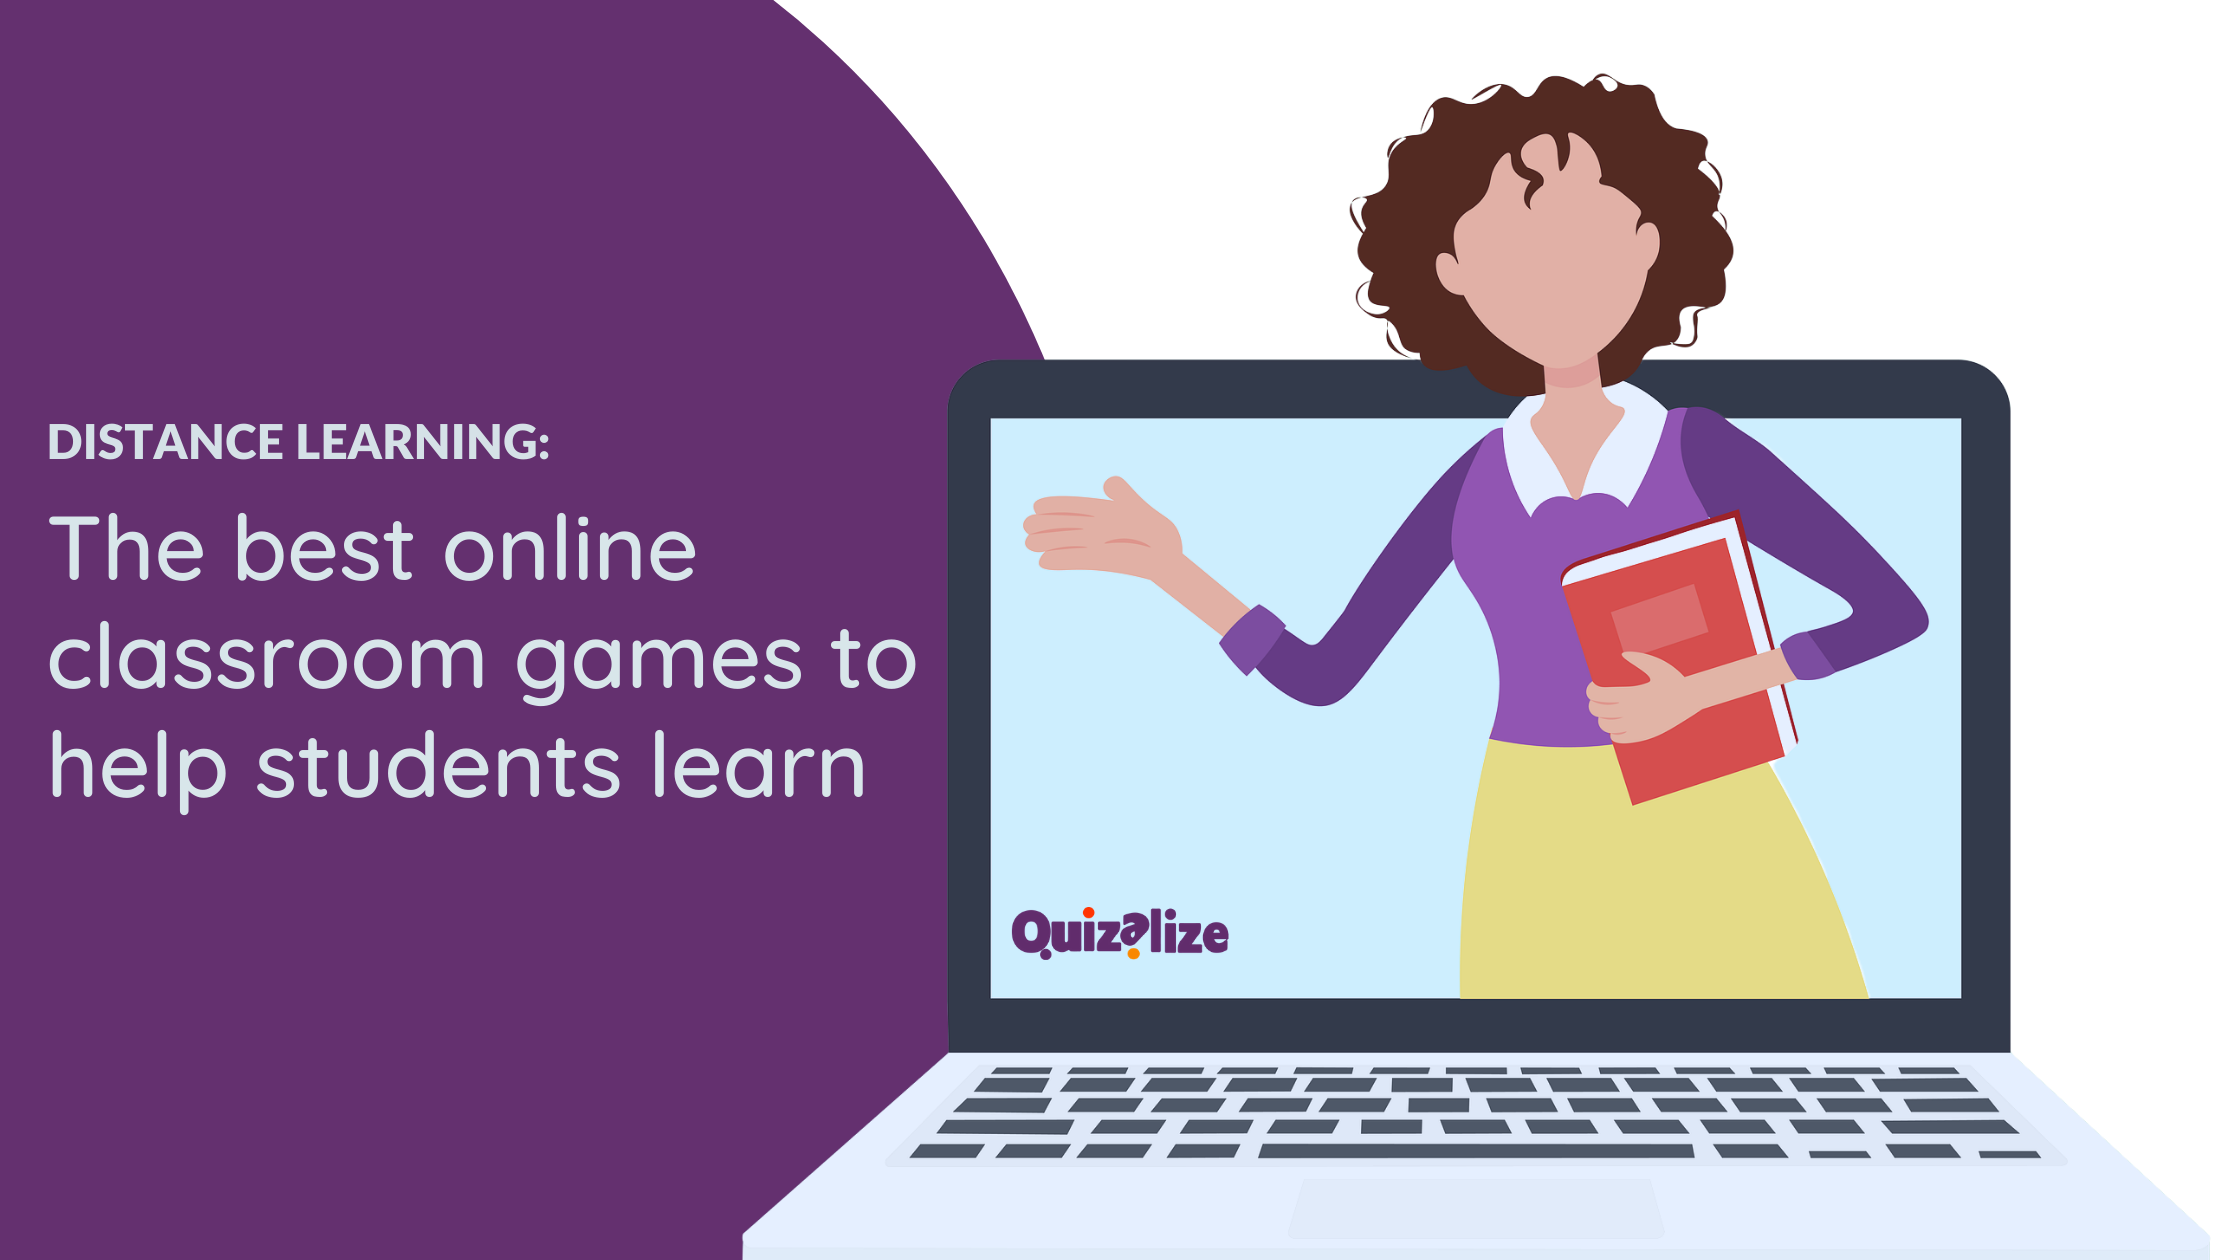 Online Games for Fun or Games for Learning?